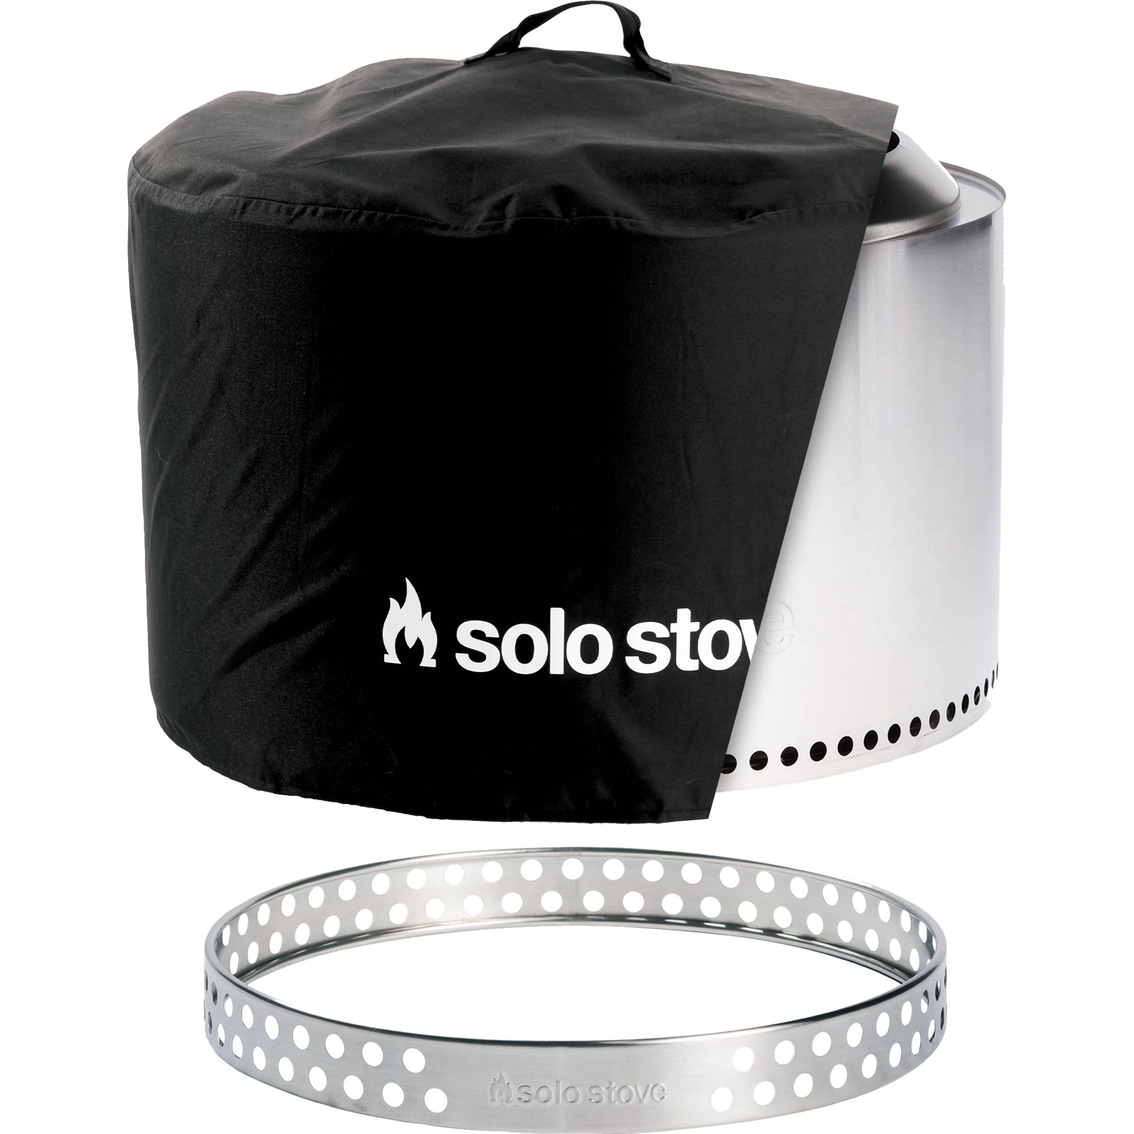 Solo Stove Yukon, Stand and Shelter 2.0